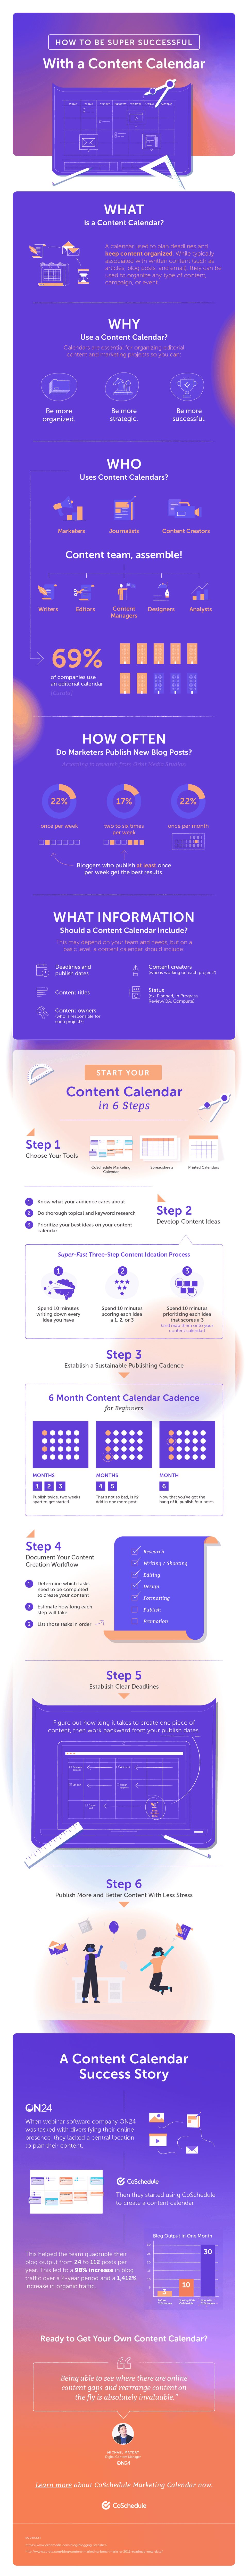 How to be super successful with a content calendar